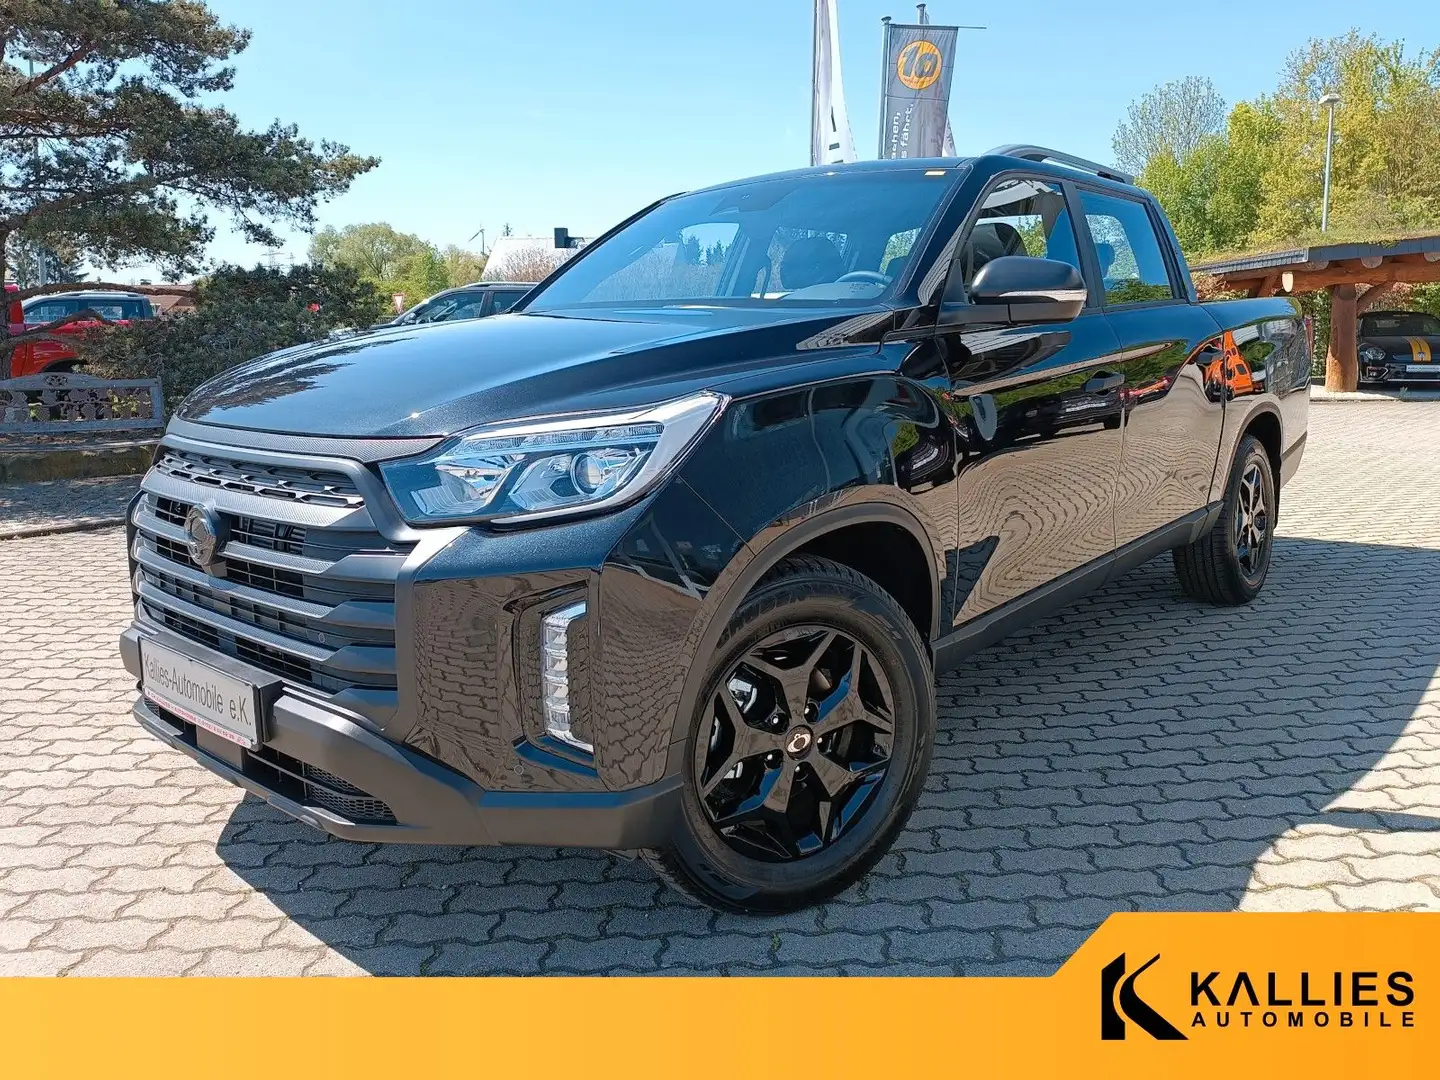 SsangYong Musso Musso 2.2d 202PS AT 4x4 LEDER+XENON+SD+DIF crna - 1